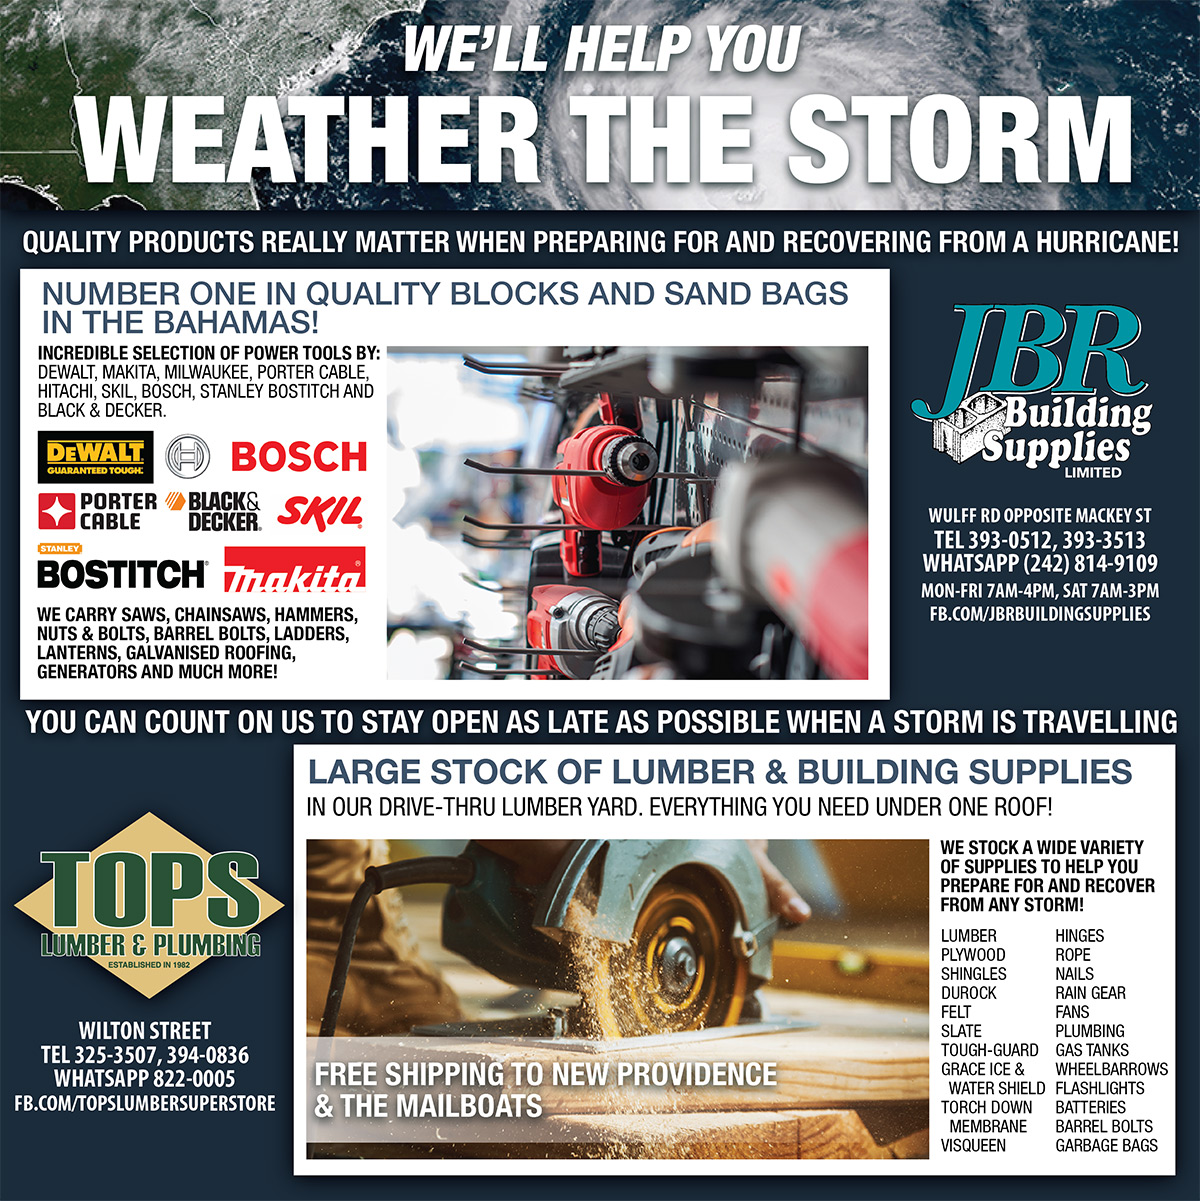 JBR Building Supplies Ltd - We'll Help You Weather The Storm